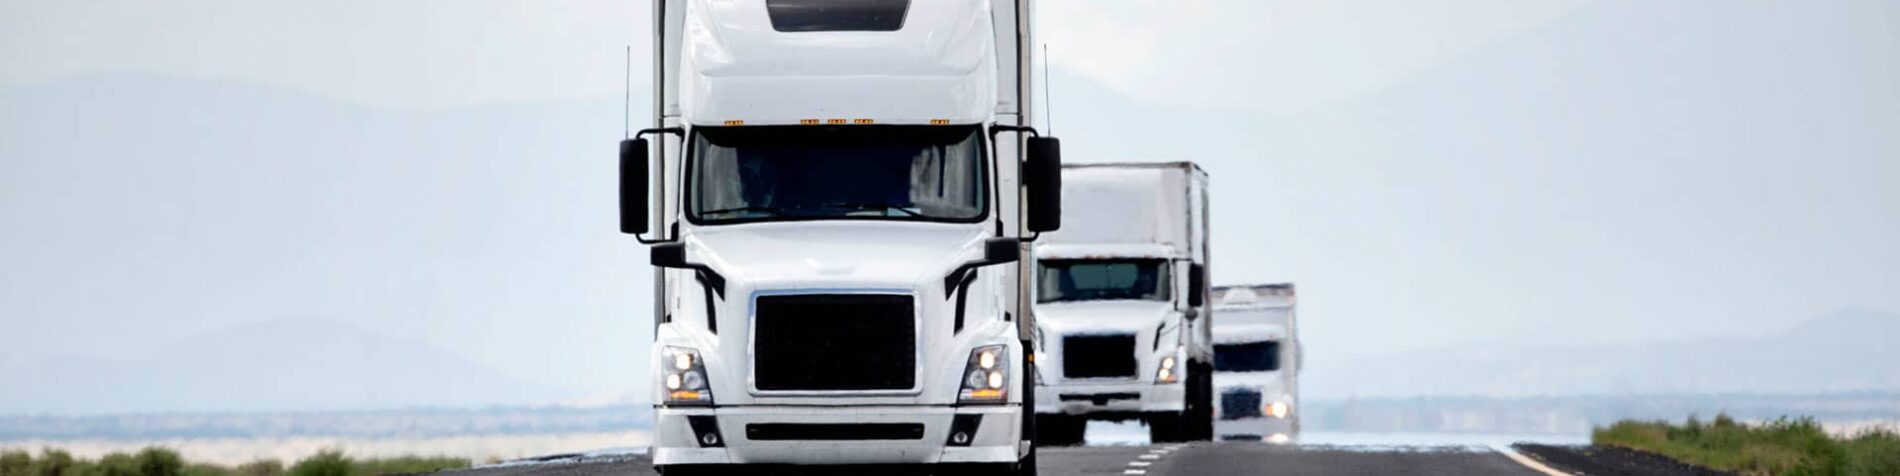 The Road to Fix the Massive Truck Driver Shortage Is Paved with Data